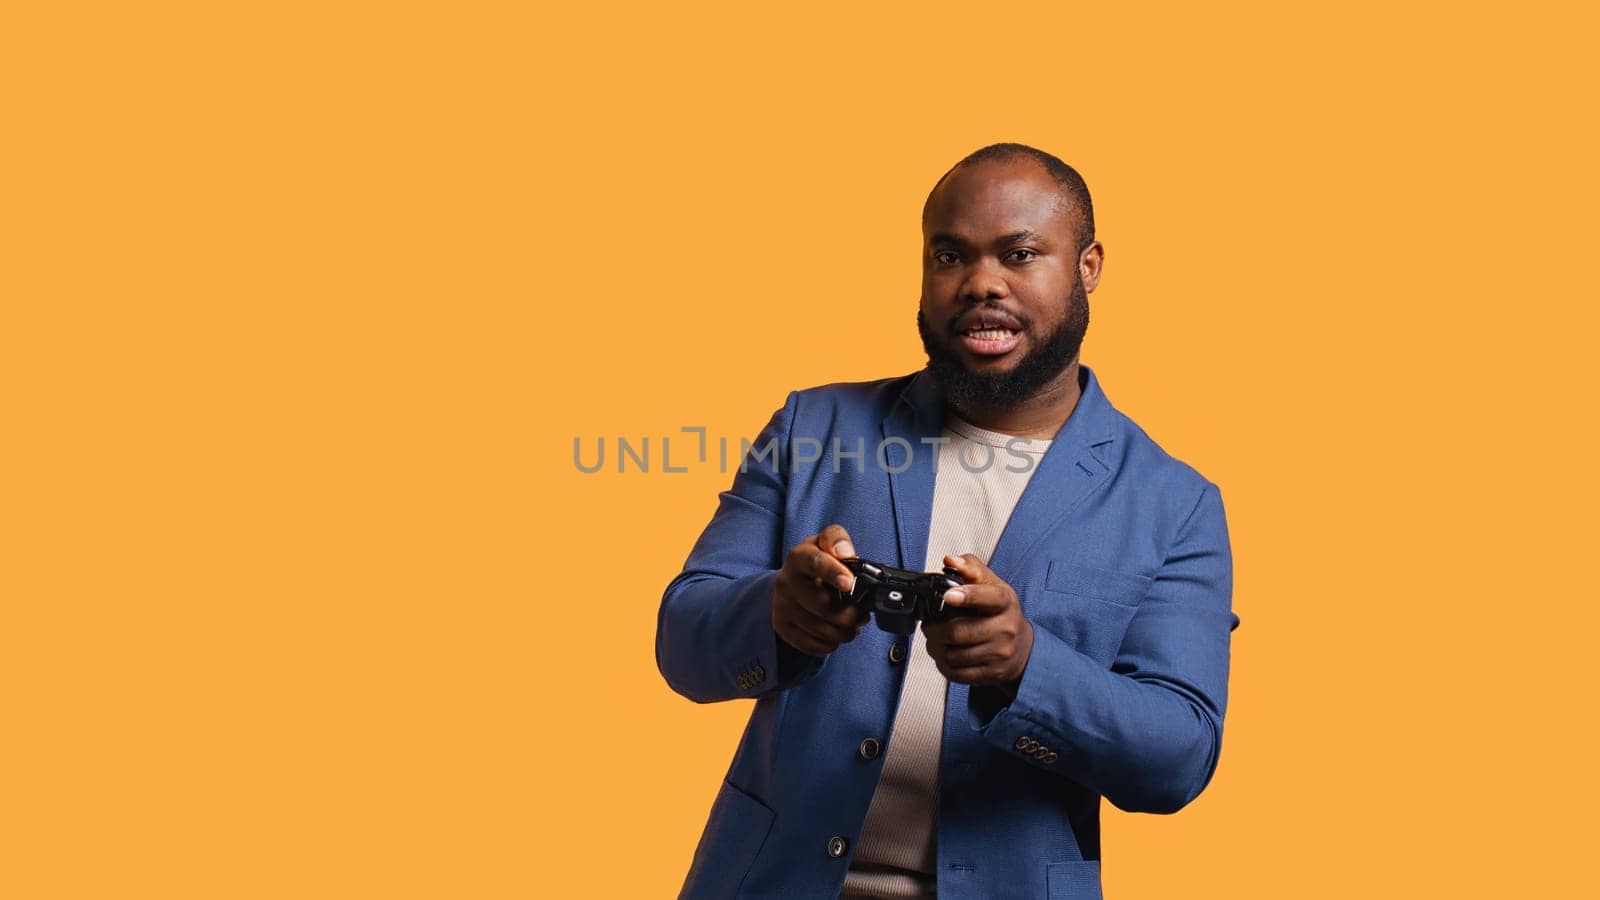 Upset man showing thumbs down sign gesturing holding controller, disapproving of videogames. Displeased BIPOC person against gaming, doing rejection hand gesture, studio background, camera B